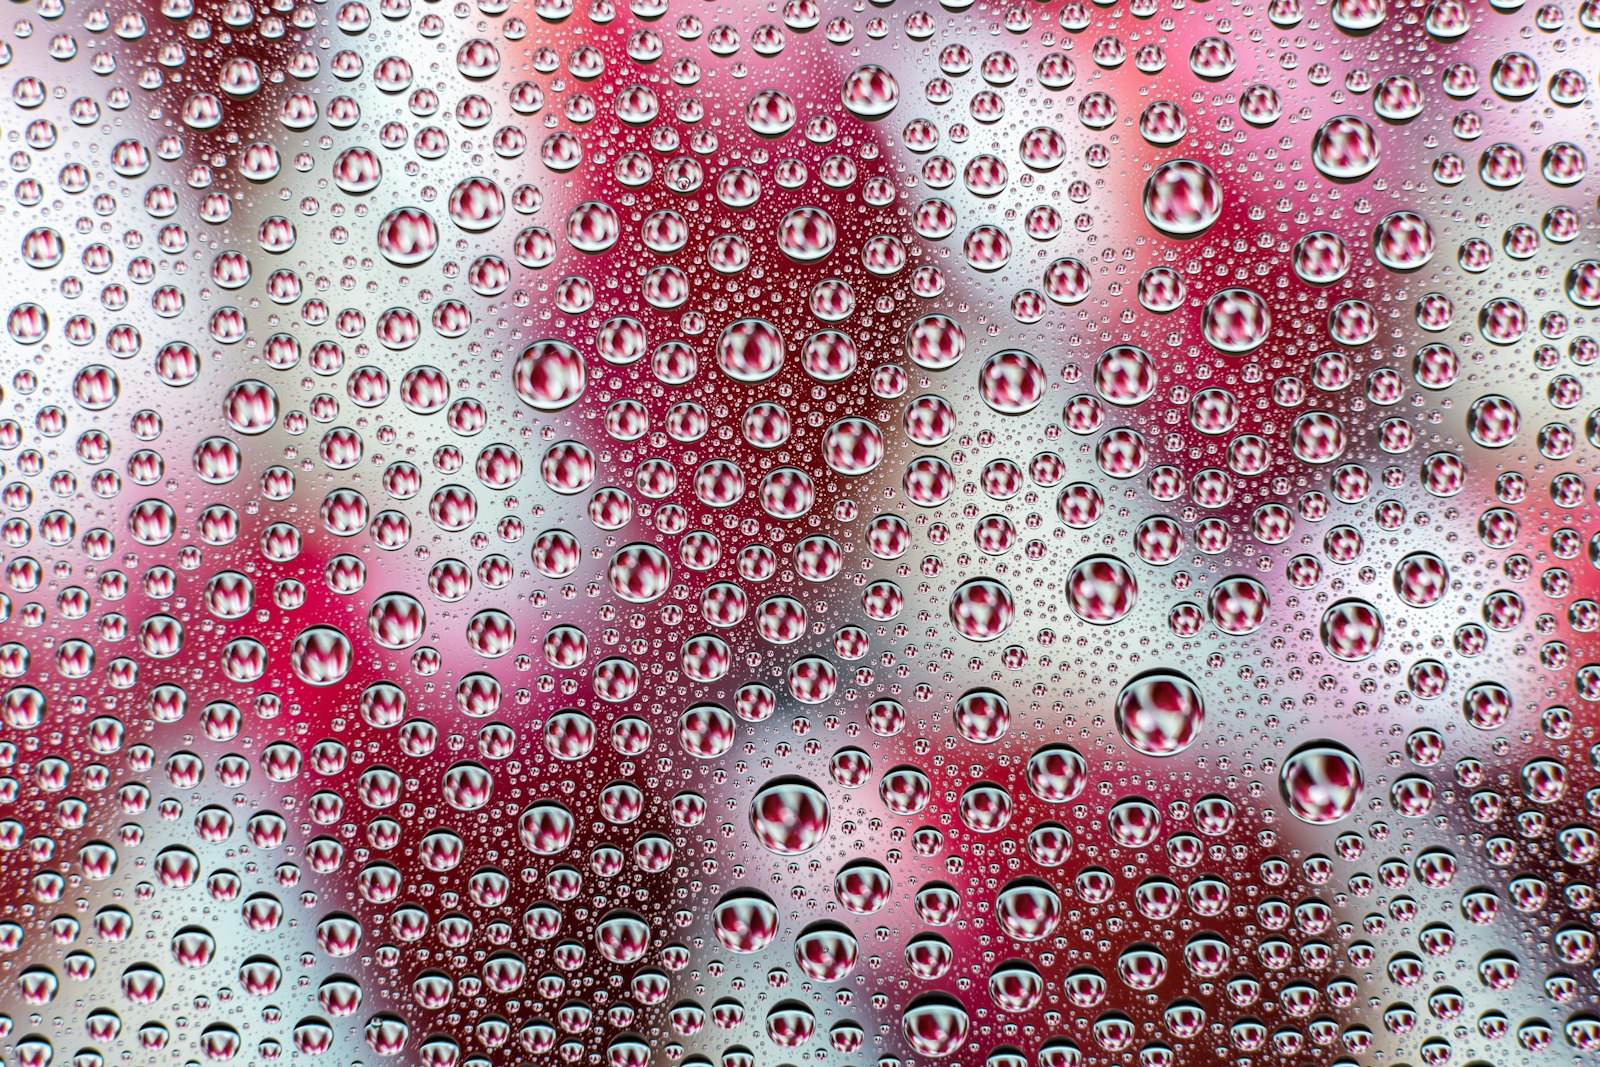 Tamron SP 85mm F1.8 Di VC USD sample photo. Water droplets on glass photography